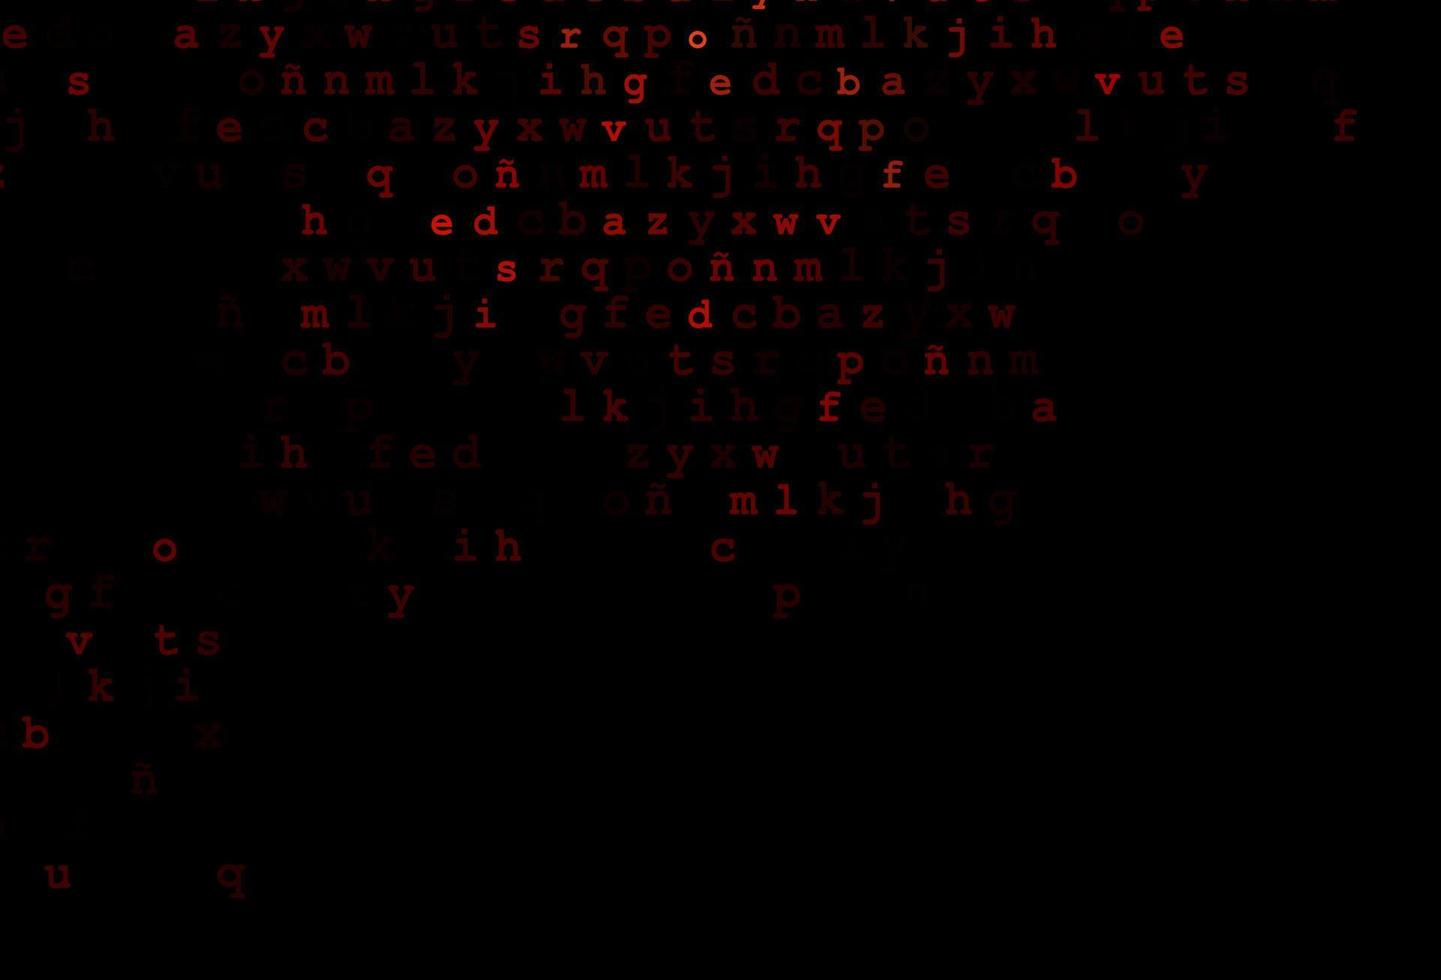 Dark red vector texture with ABC characters.